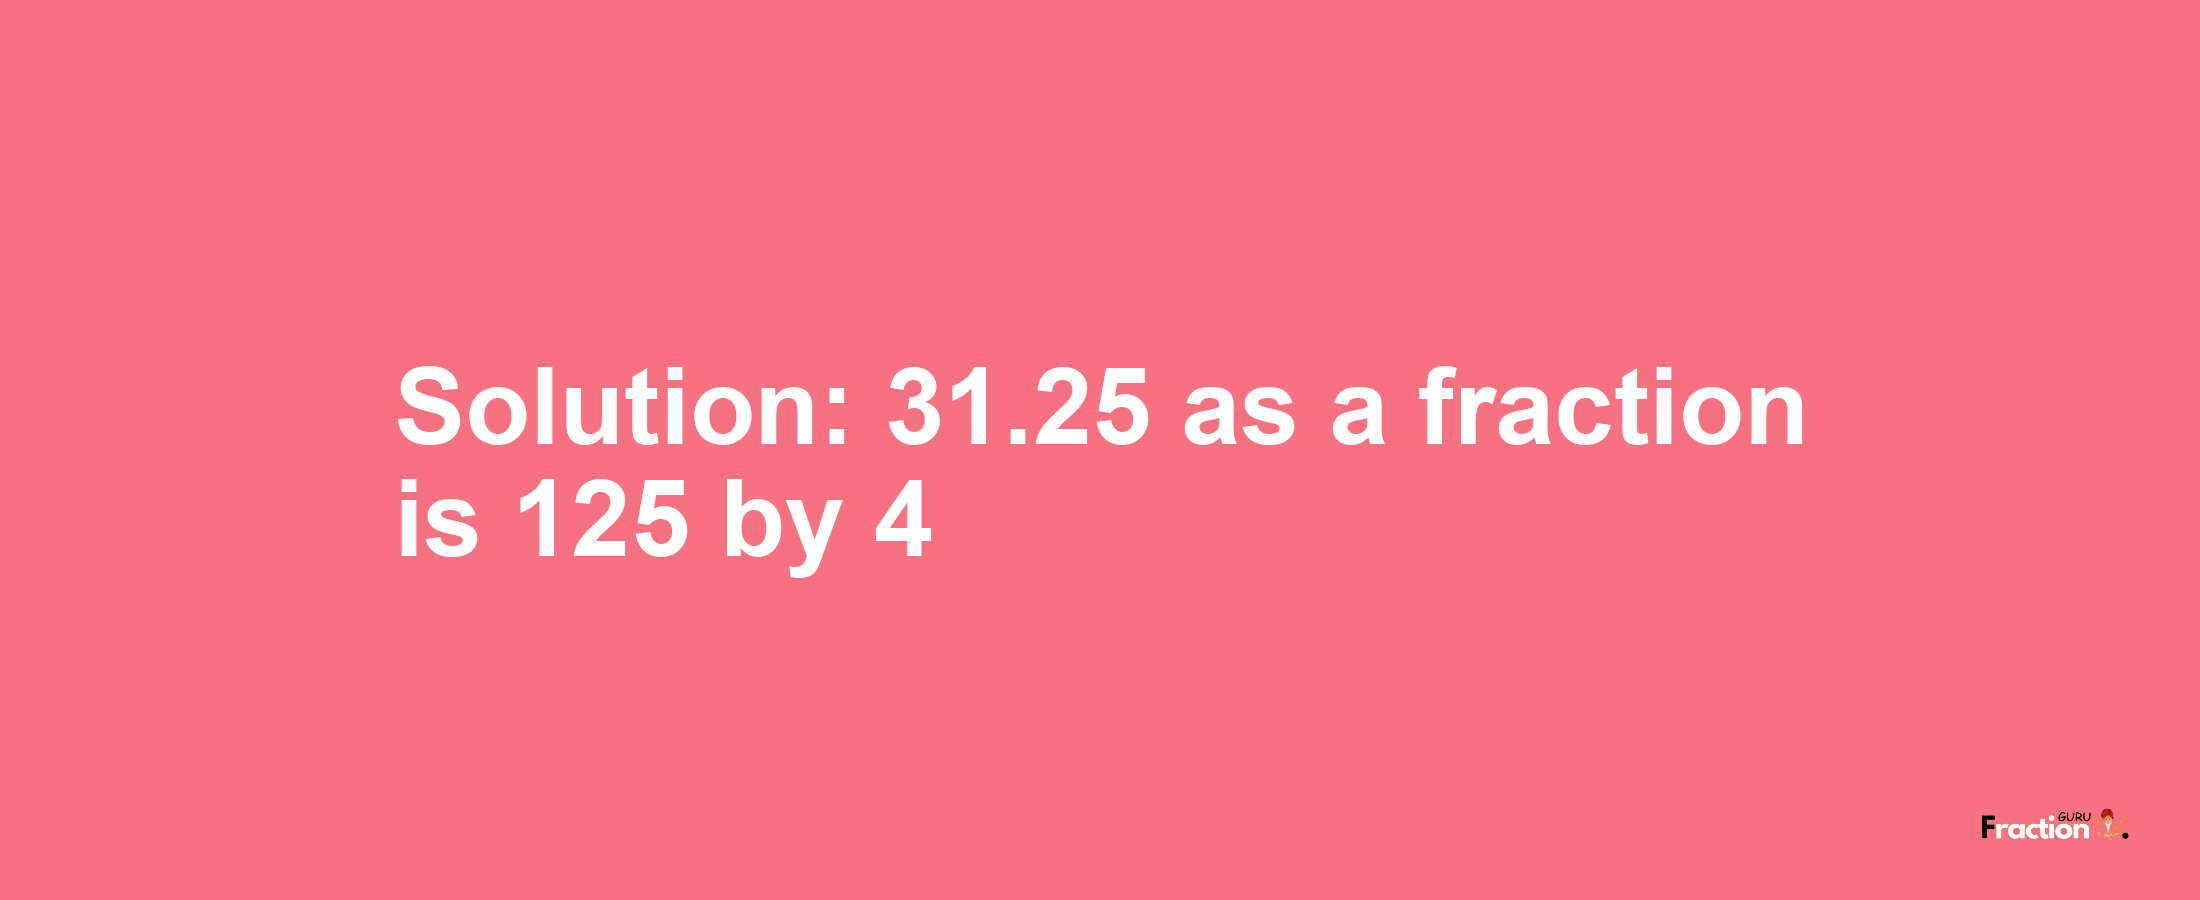 Solution:31.25 as a fraction is 125/4